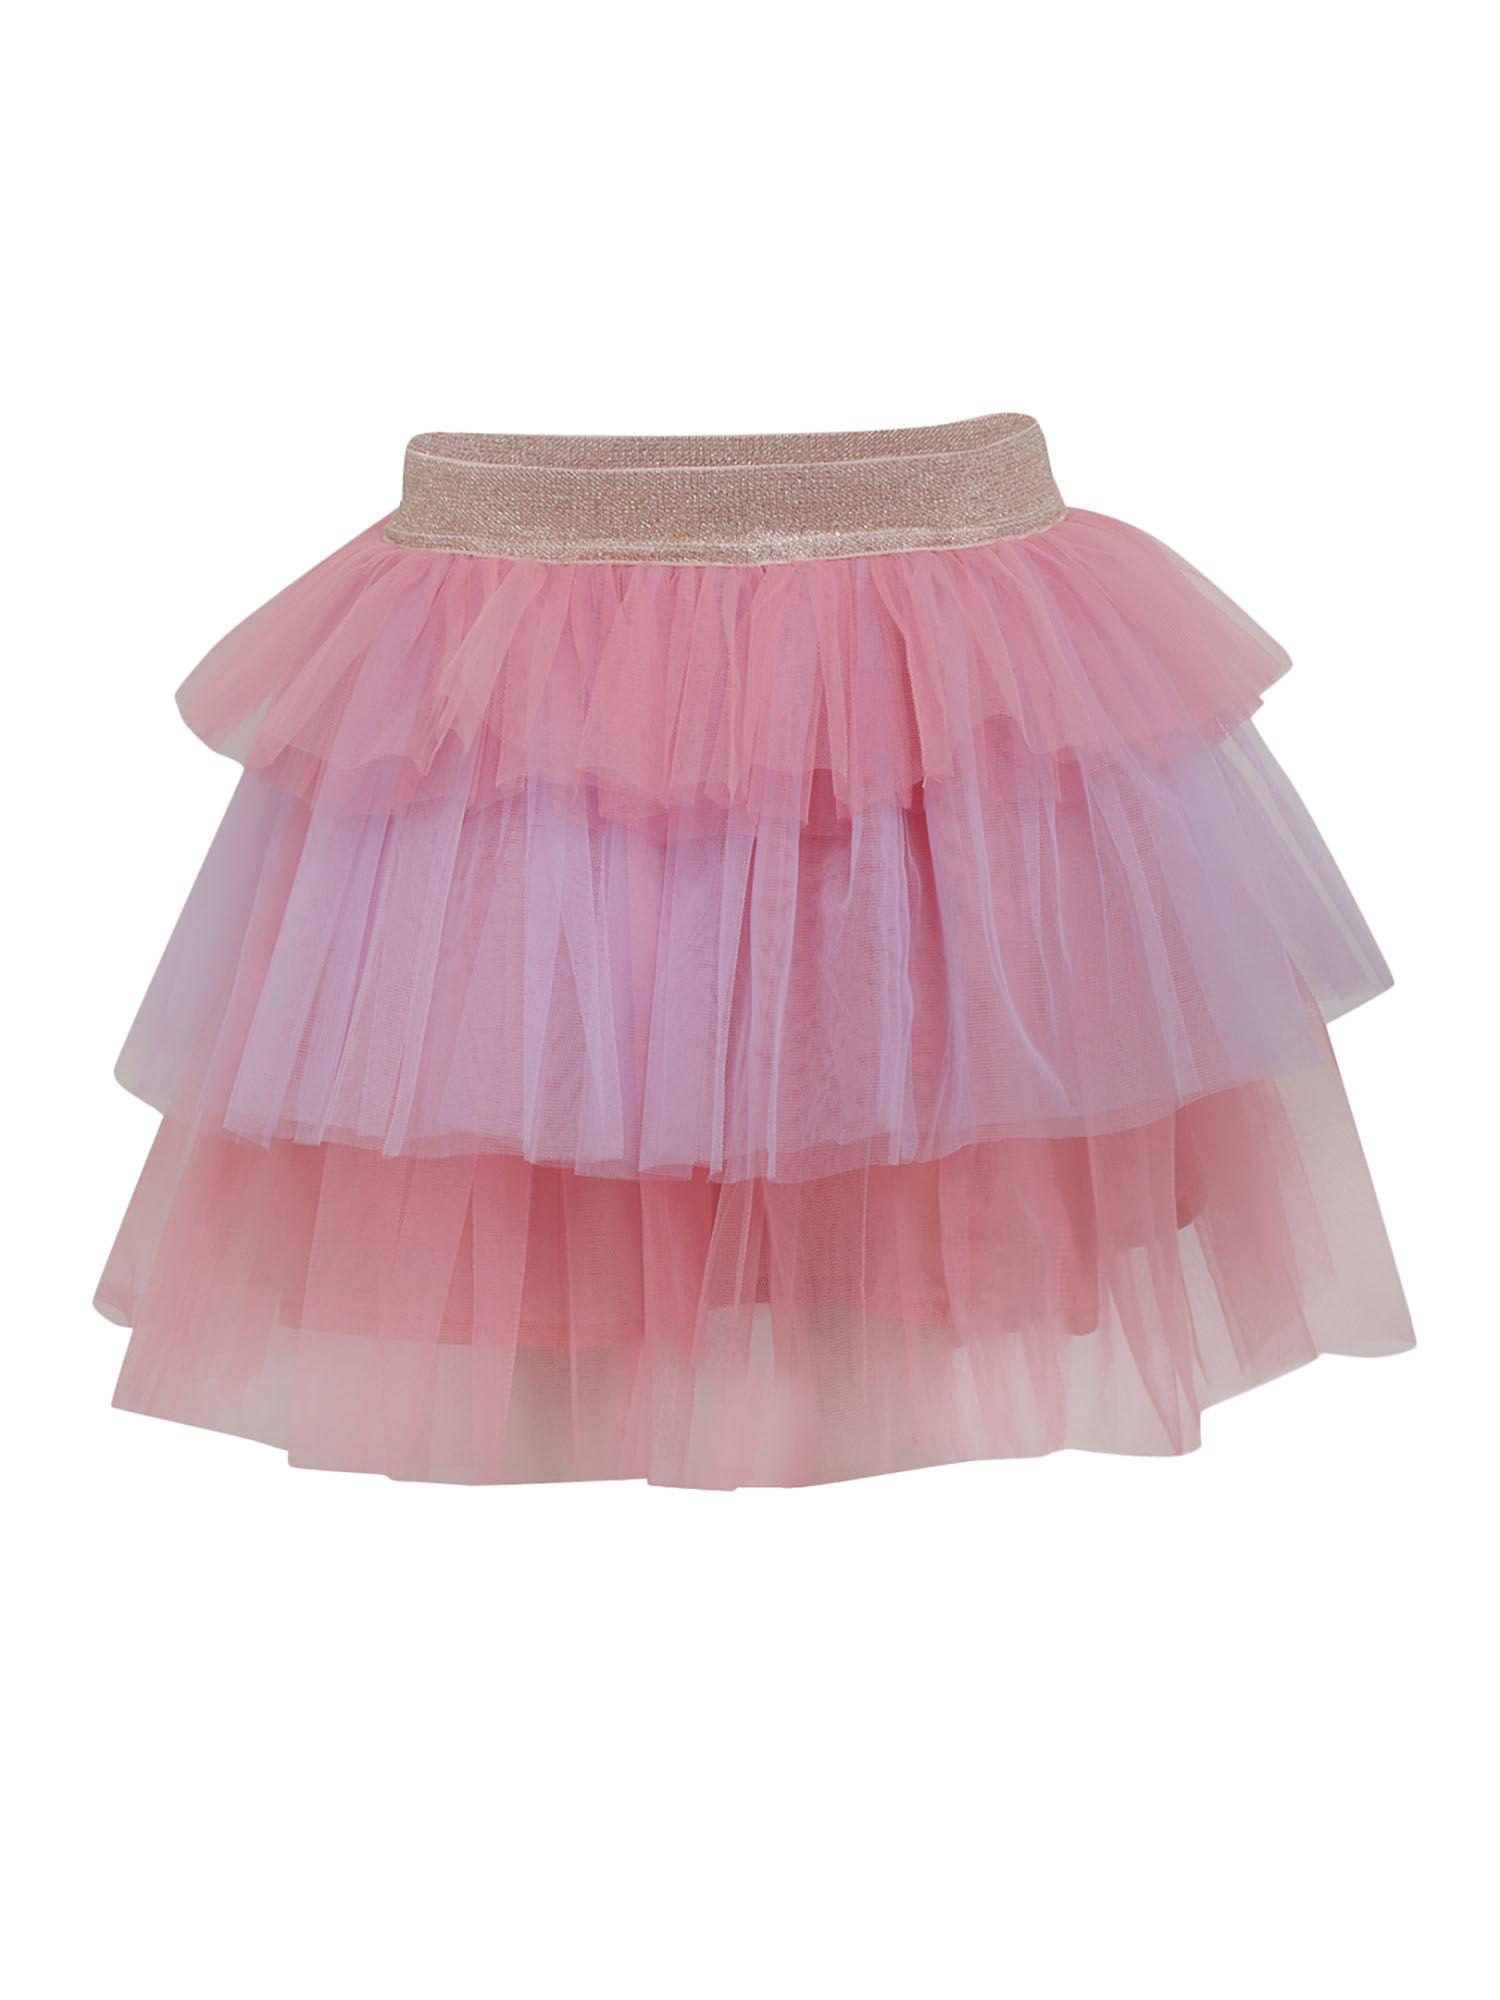 multi-color tier tulle skirt